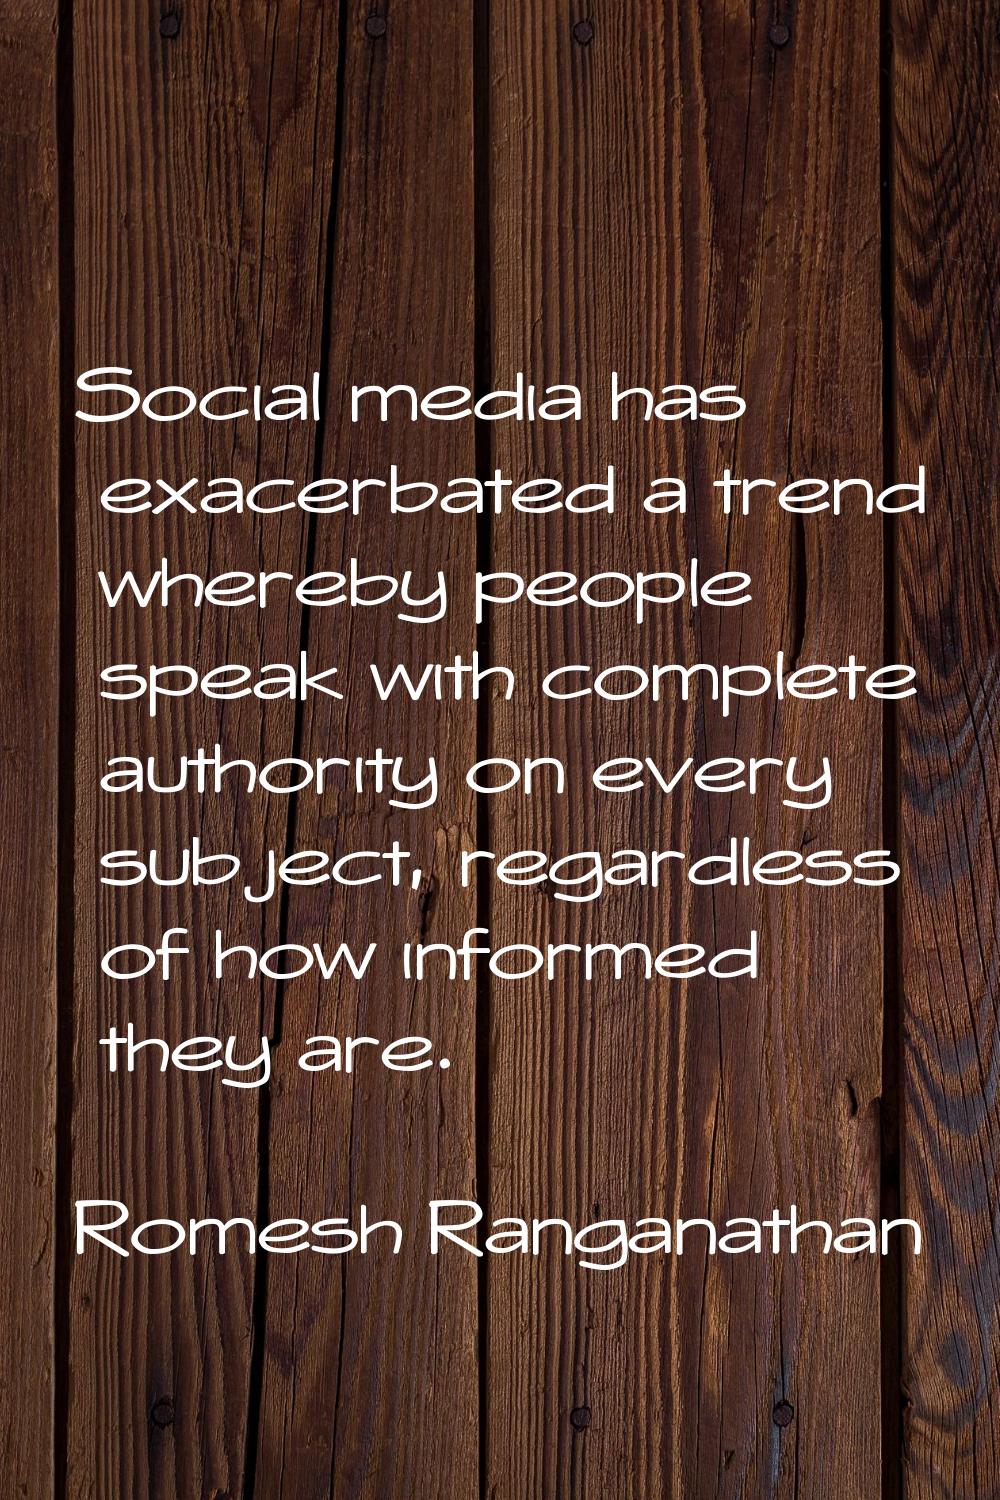 Social media has exacerbated a trend whereby people speak with complete authority on every subject,